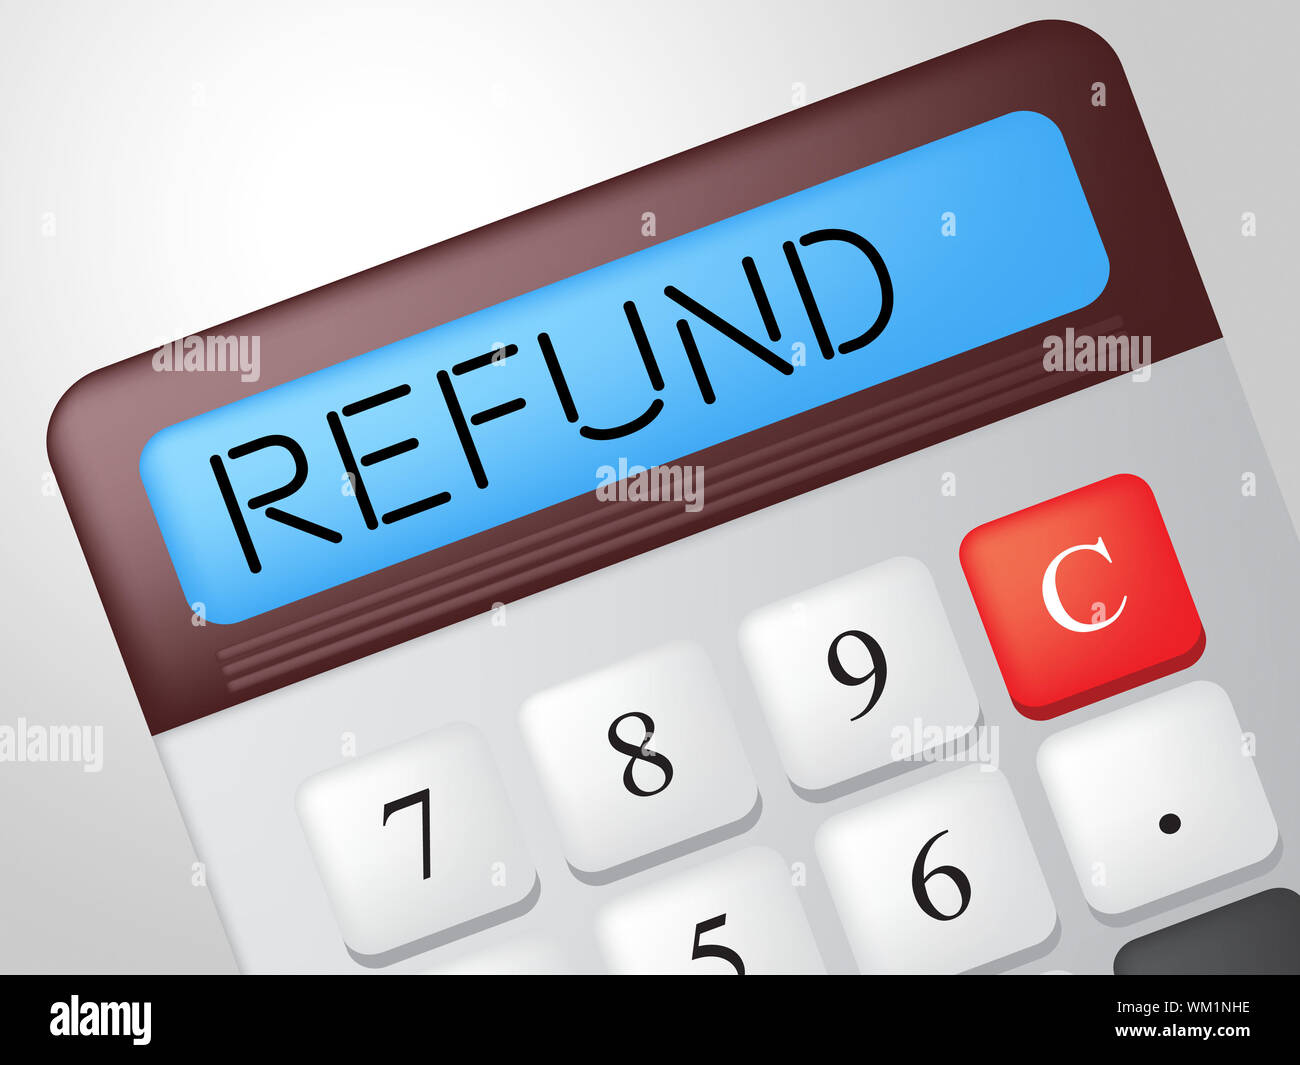 refund-calculator-showing-discount-remuneration-and-rebate-stock-photo